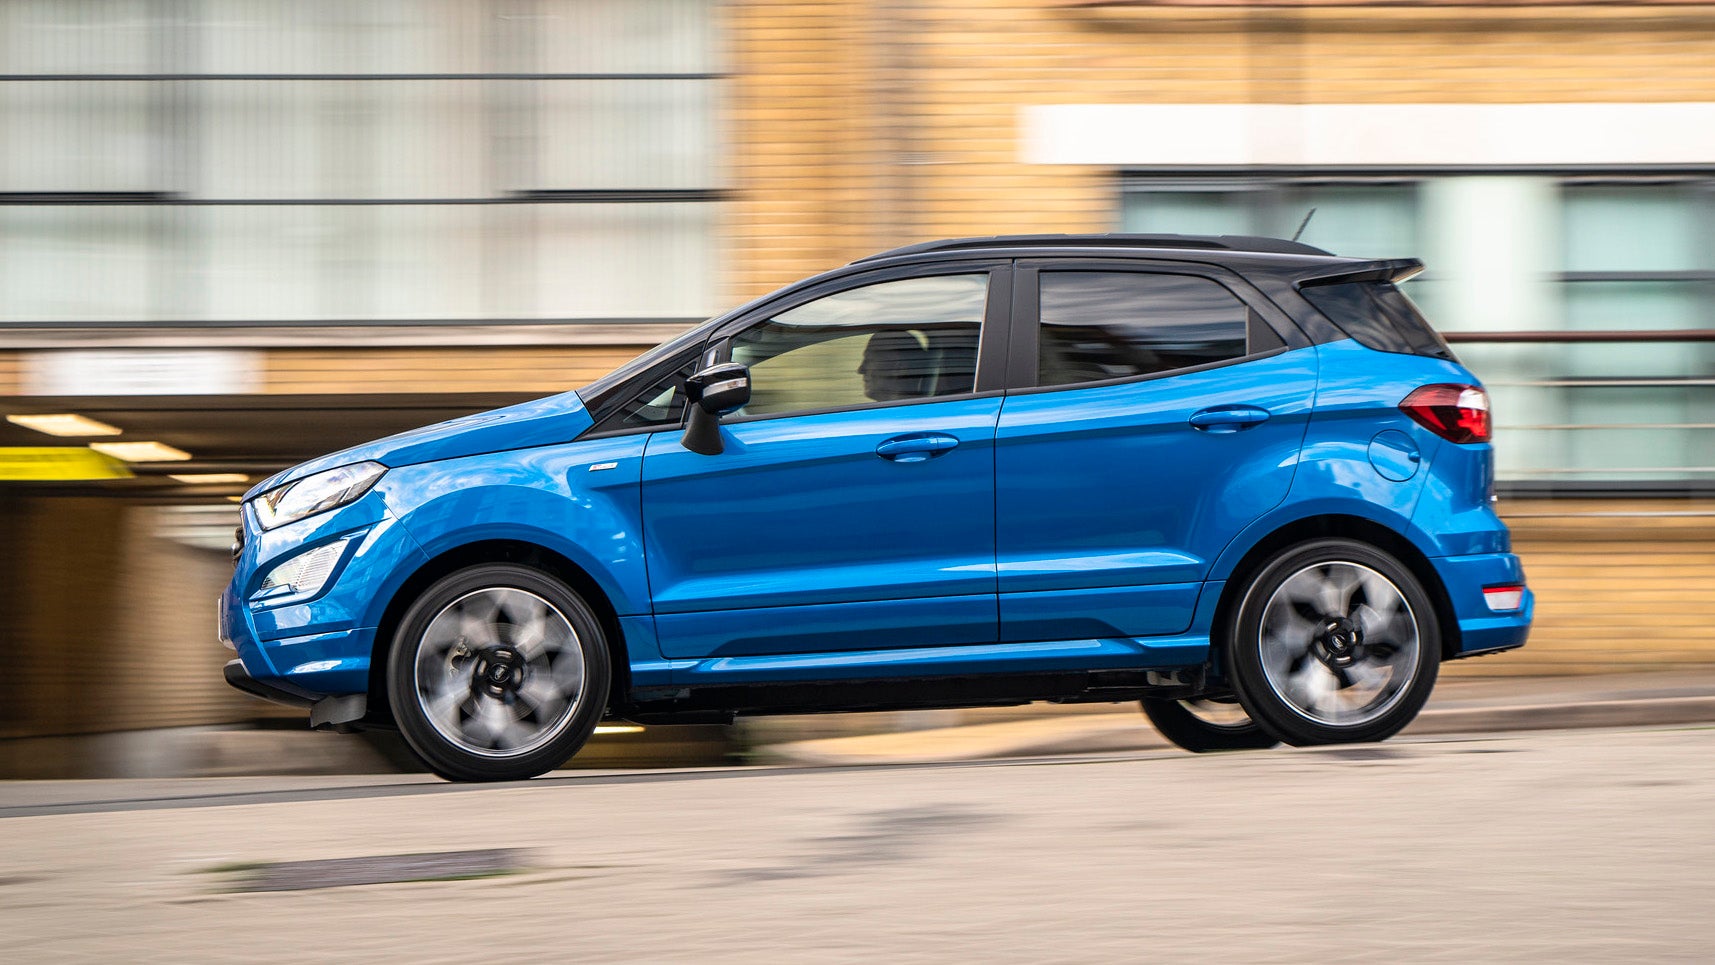 Ford Ecosport driving side view